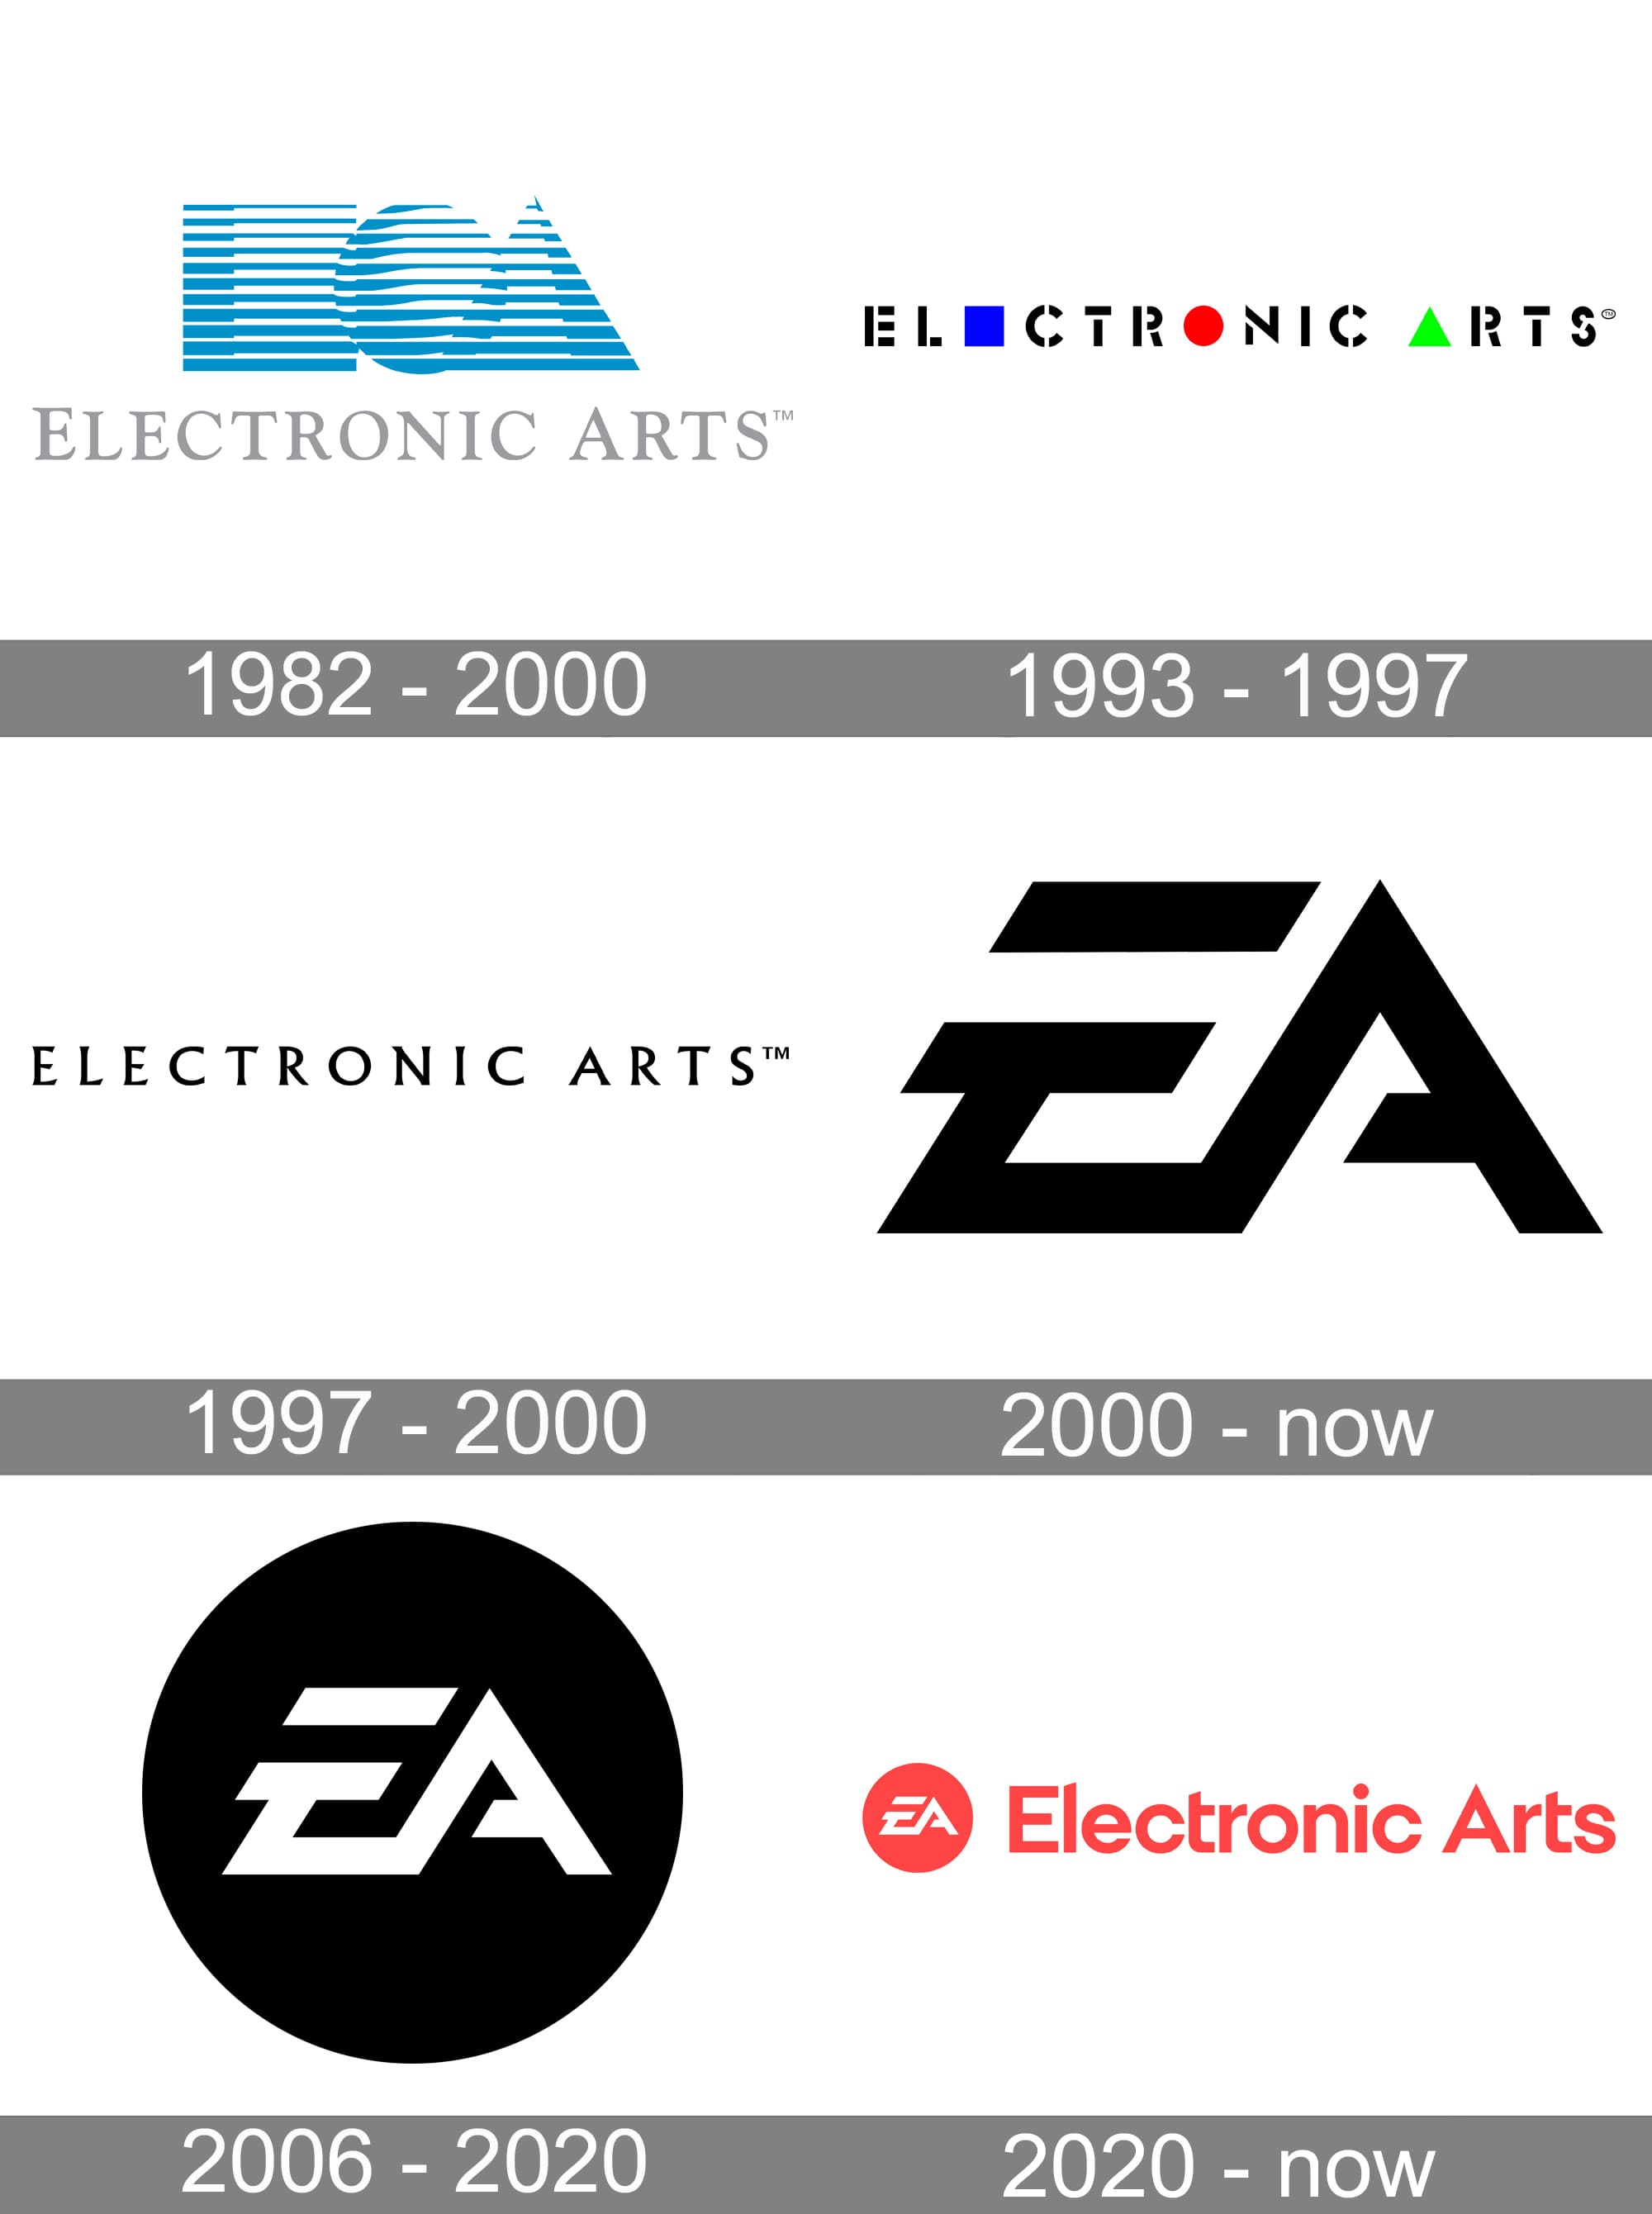 Back In The Game Logo Electronic Arts Video Games Font PNG